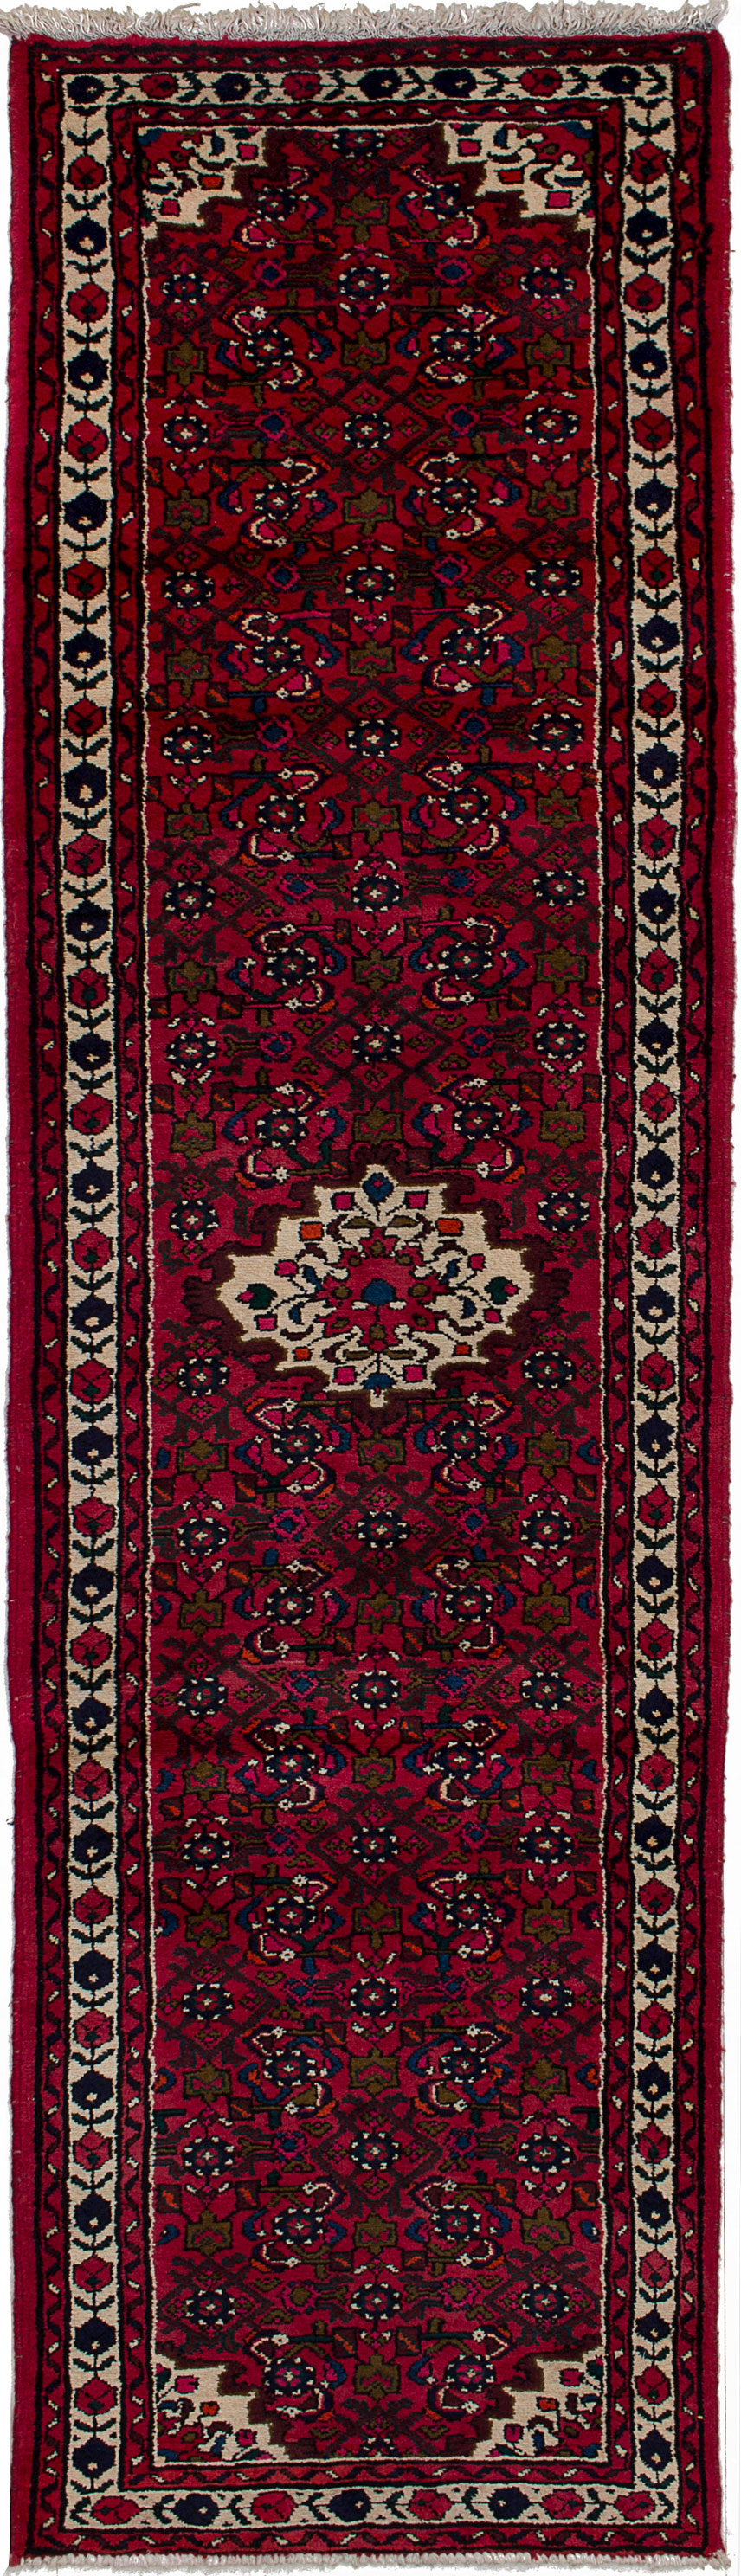 Hand-knotted Hosseinabad Red Wool Rug 2'8" x 9'6"  Size: 2'7" x 9'6"  